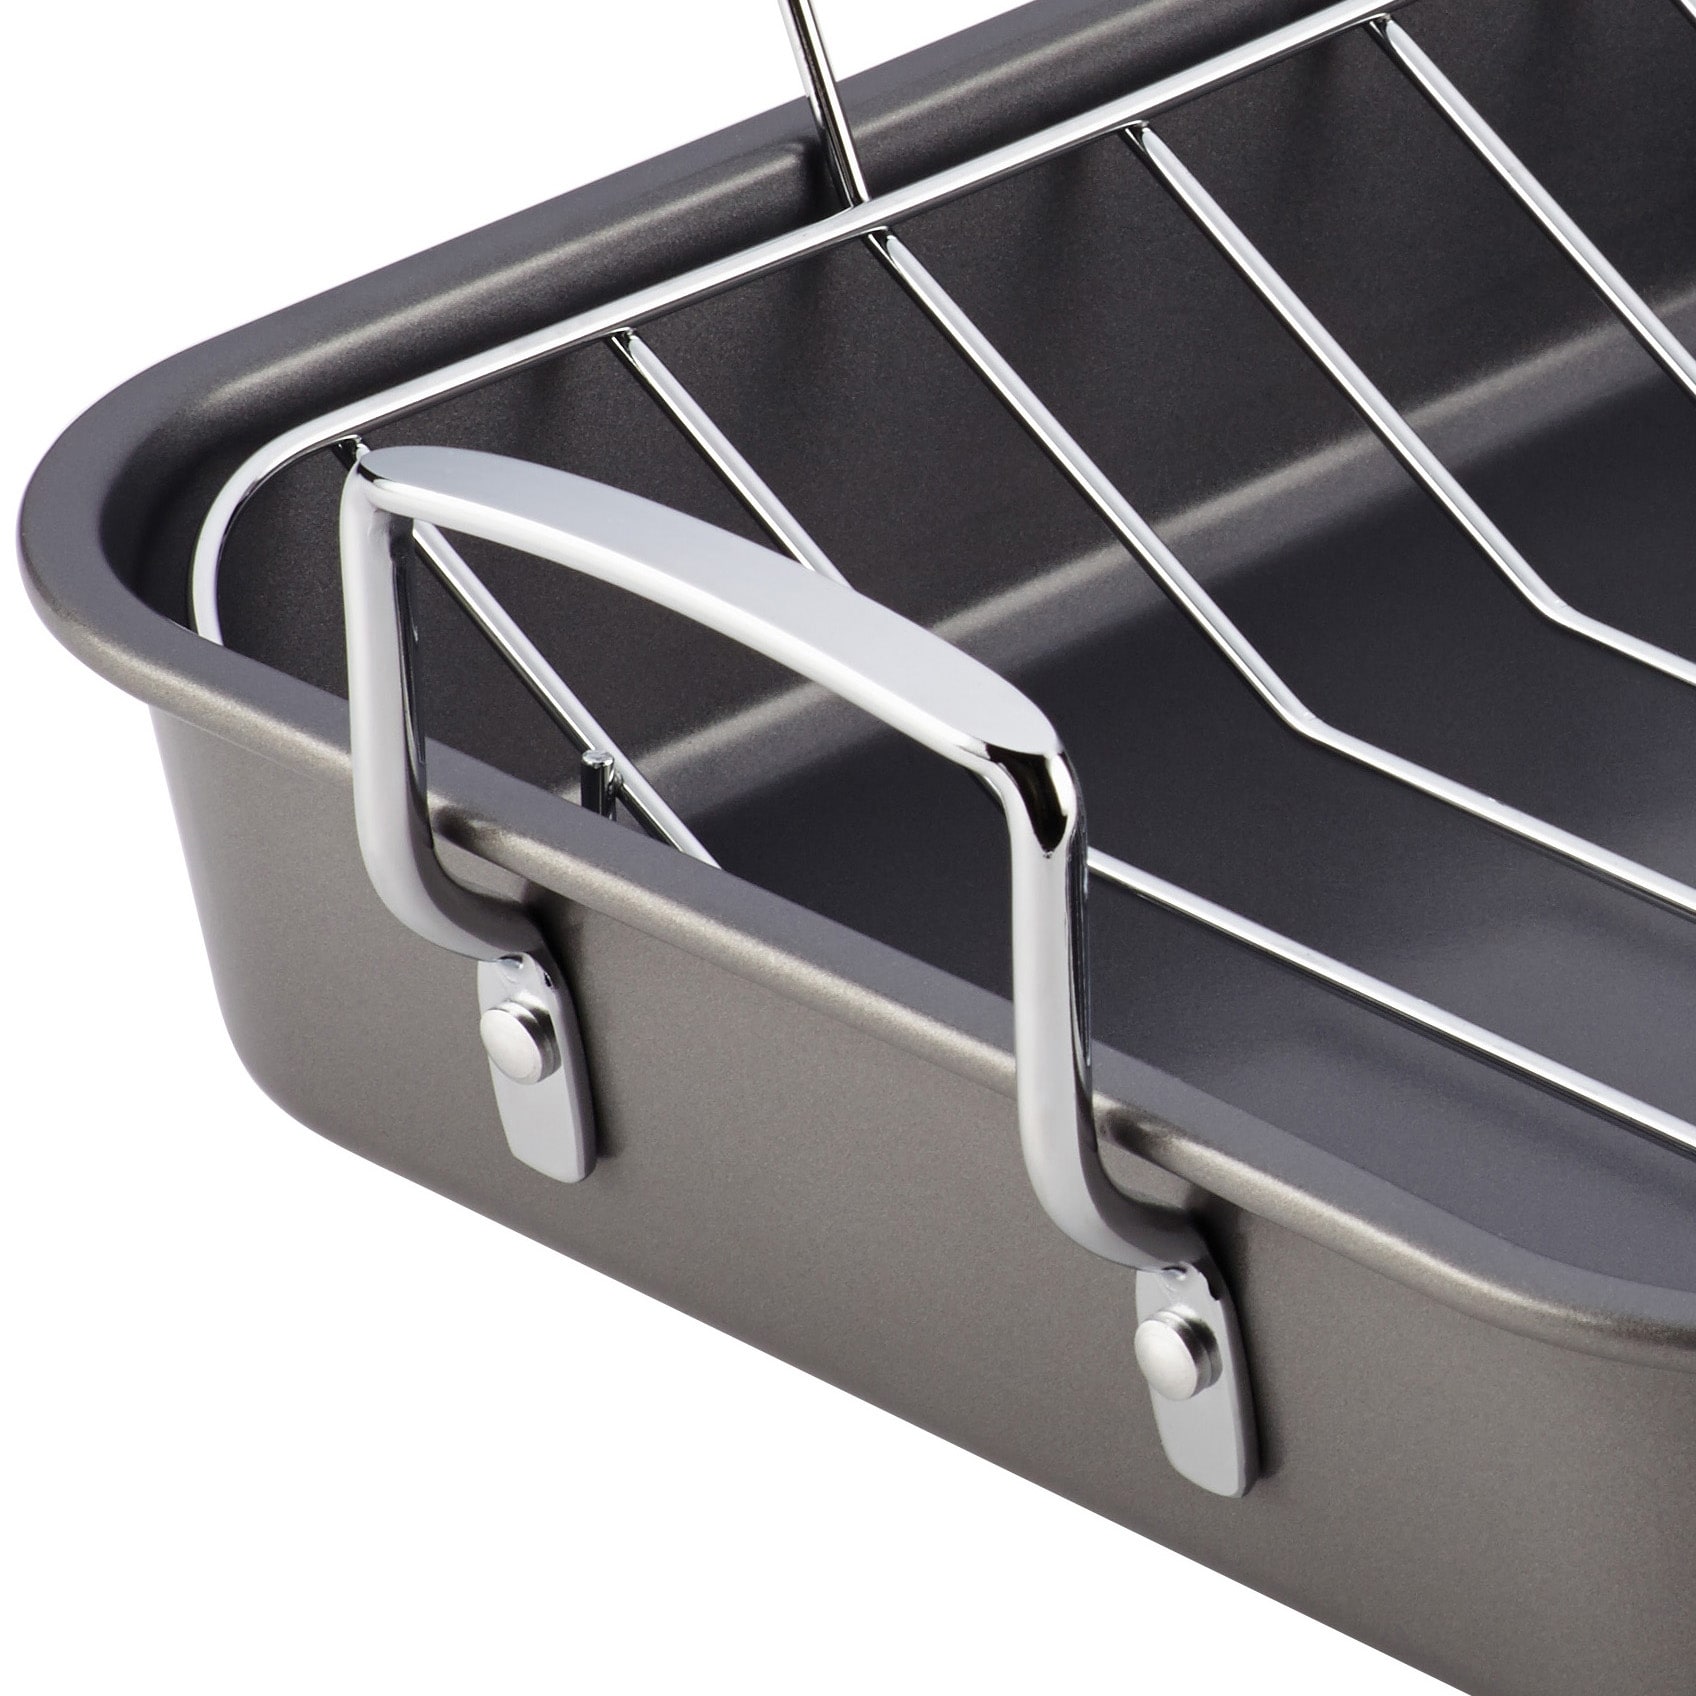 https://ak1.ostkcdn.com/images/products/is/images/direct/28579a750858261e07119a9208a6e522e1cb69dd/Farberware-Nonstick-Bakeware-Roaster-with-Rack%2C-12-Inch-x-16-Inch%2C-Gray.jpg